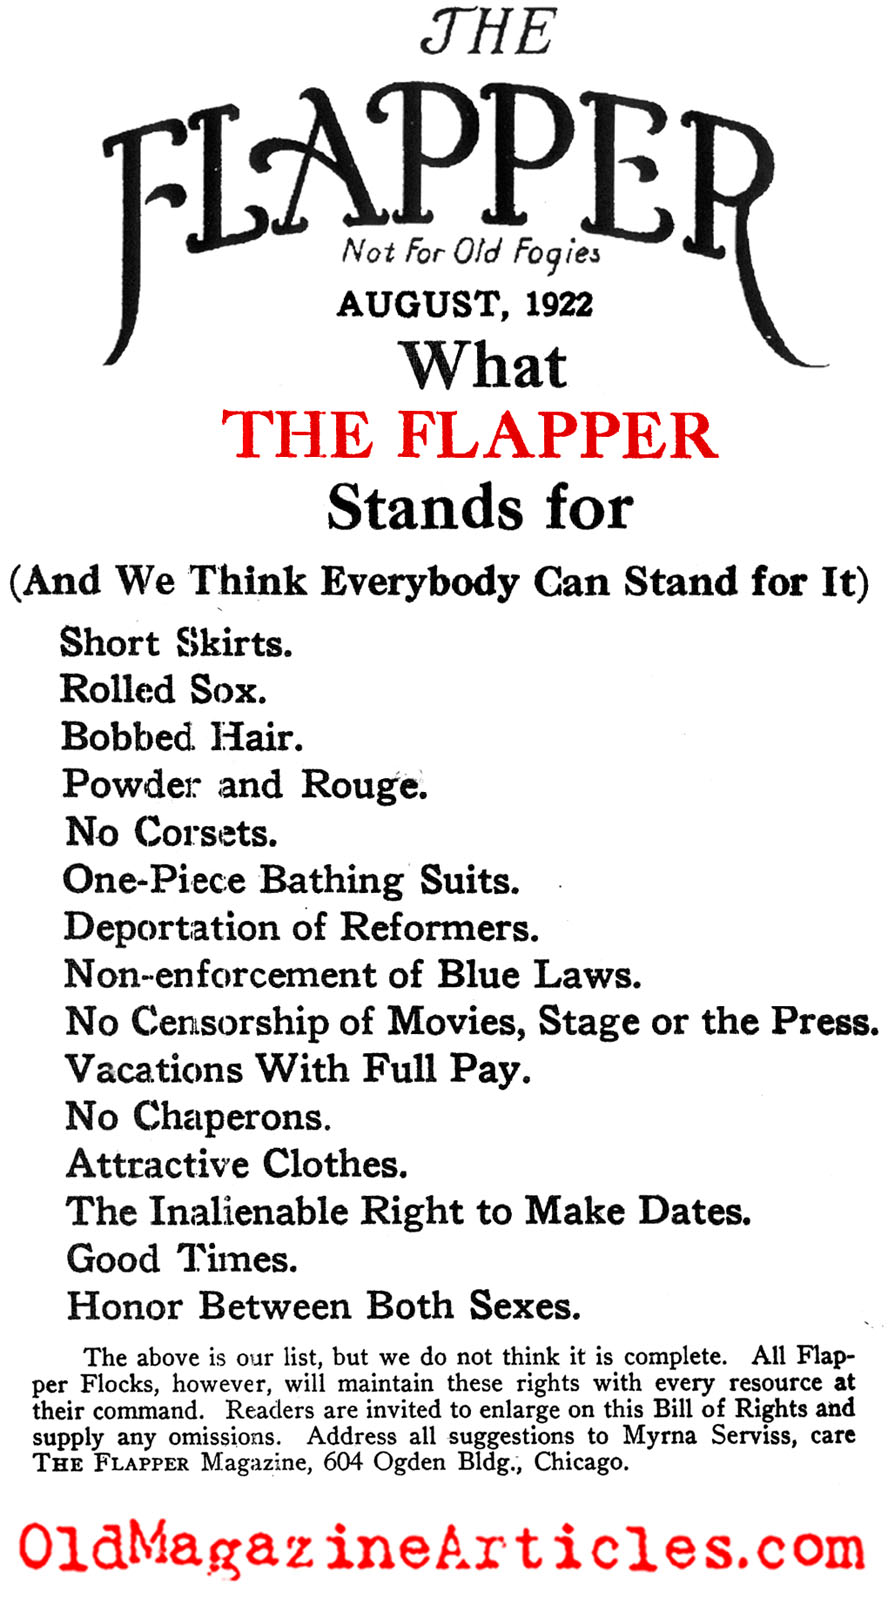 What Flappers Stood For (Flapper Magazine, 1922)